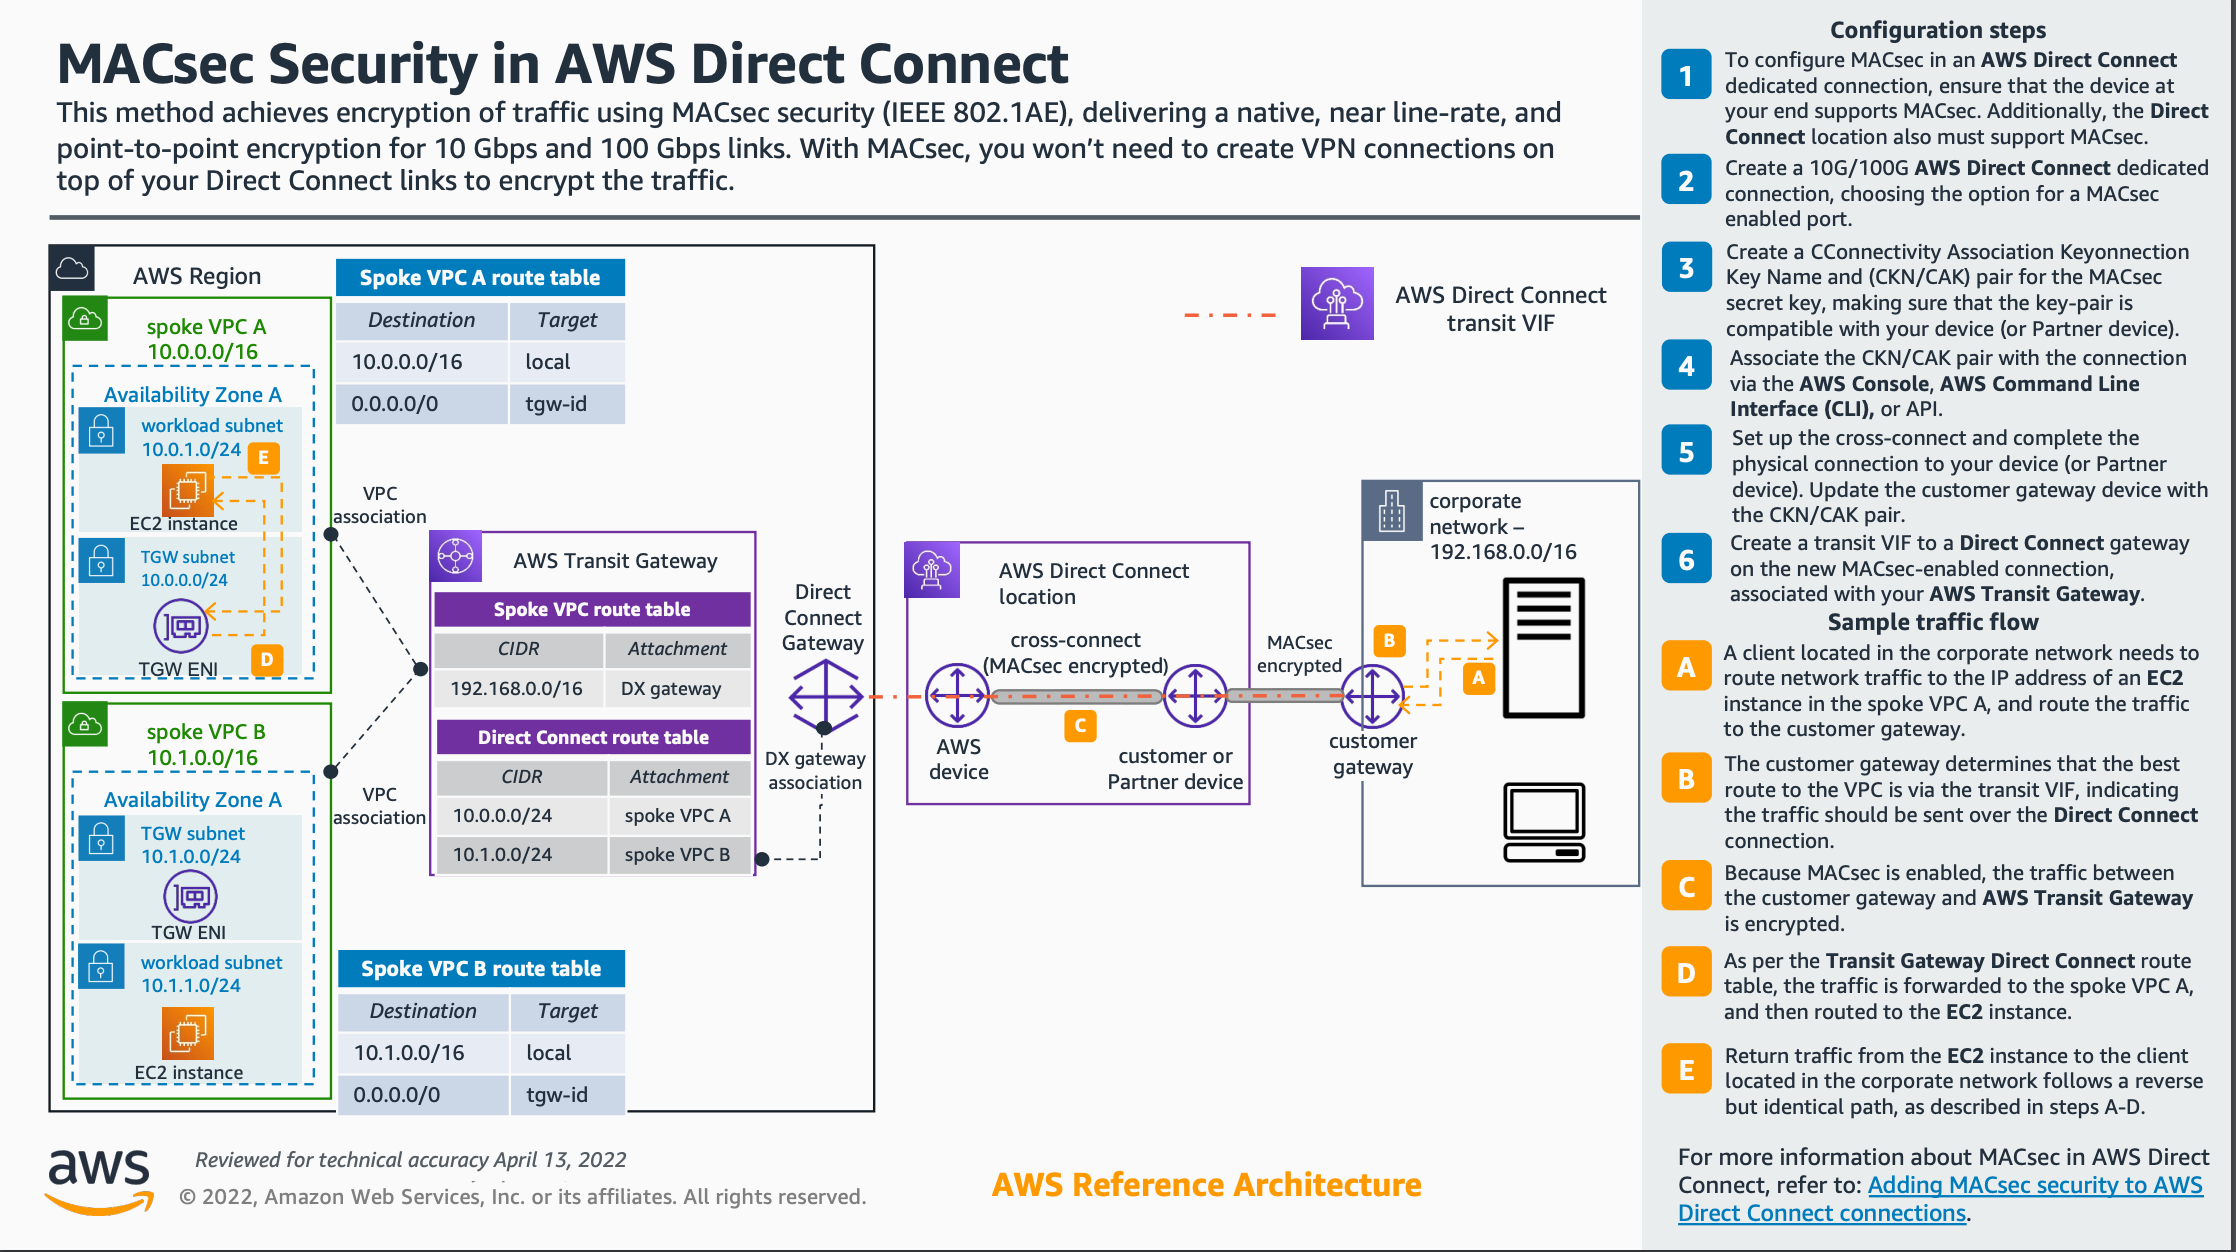 MACsec Security in AWS Direct Connect